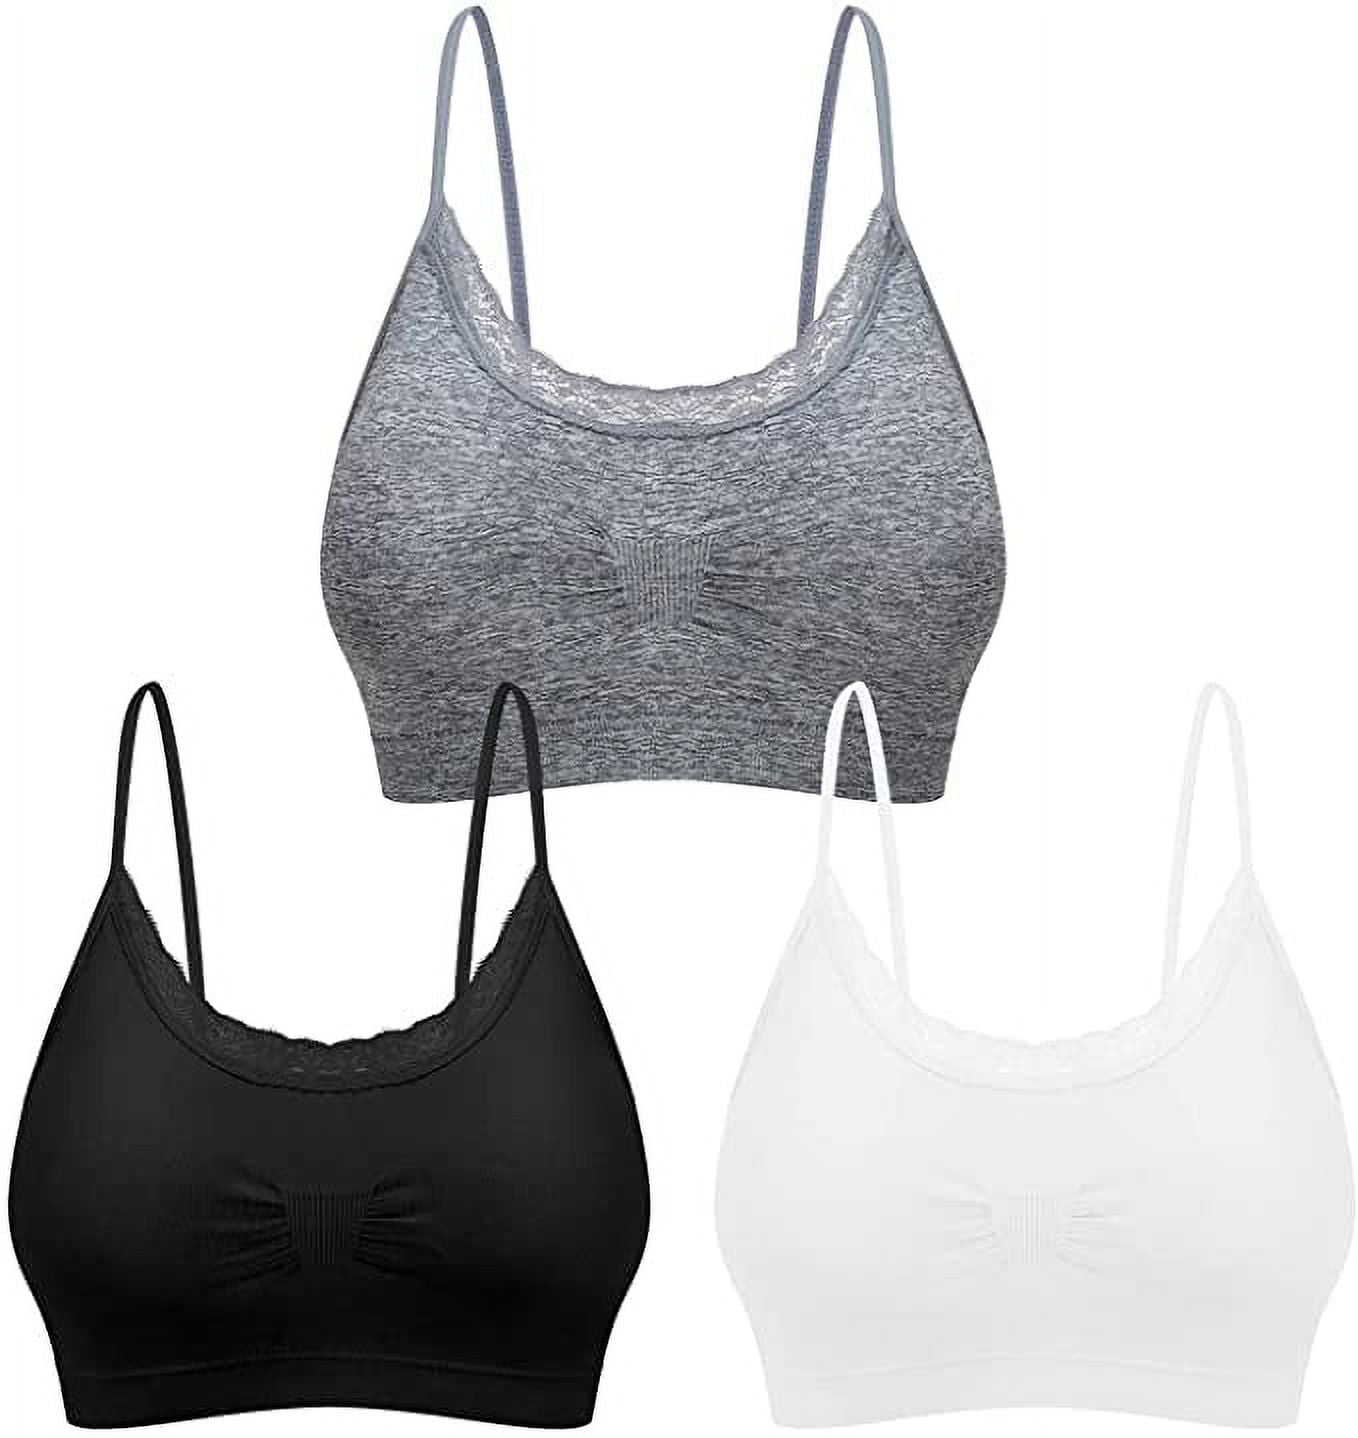 3 Pack Lace Padded Sports Bra Bralettes Tank Tops for Women Wirefree  Comfort Yoga Cami Bras A-S 